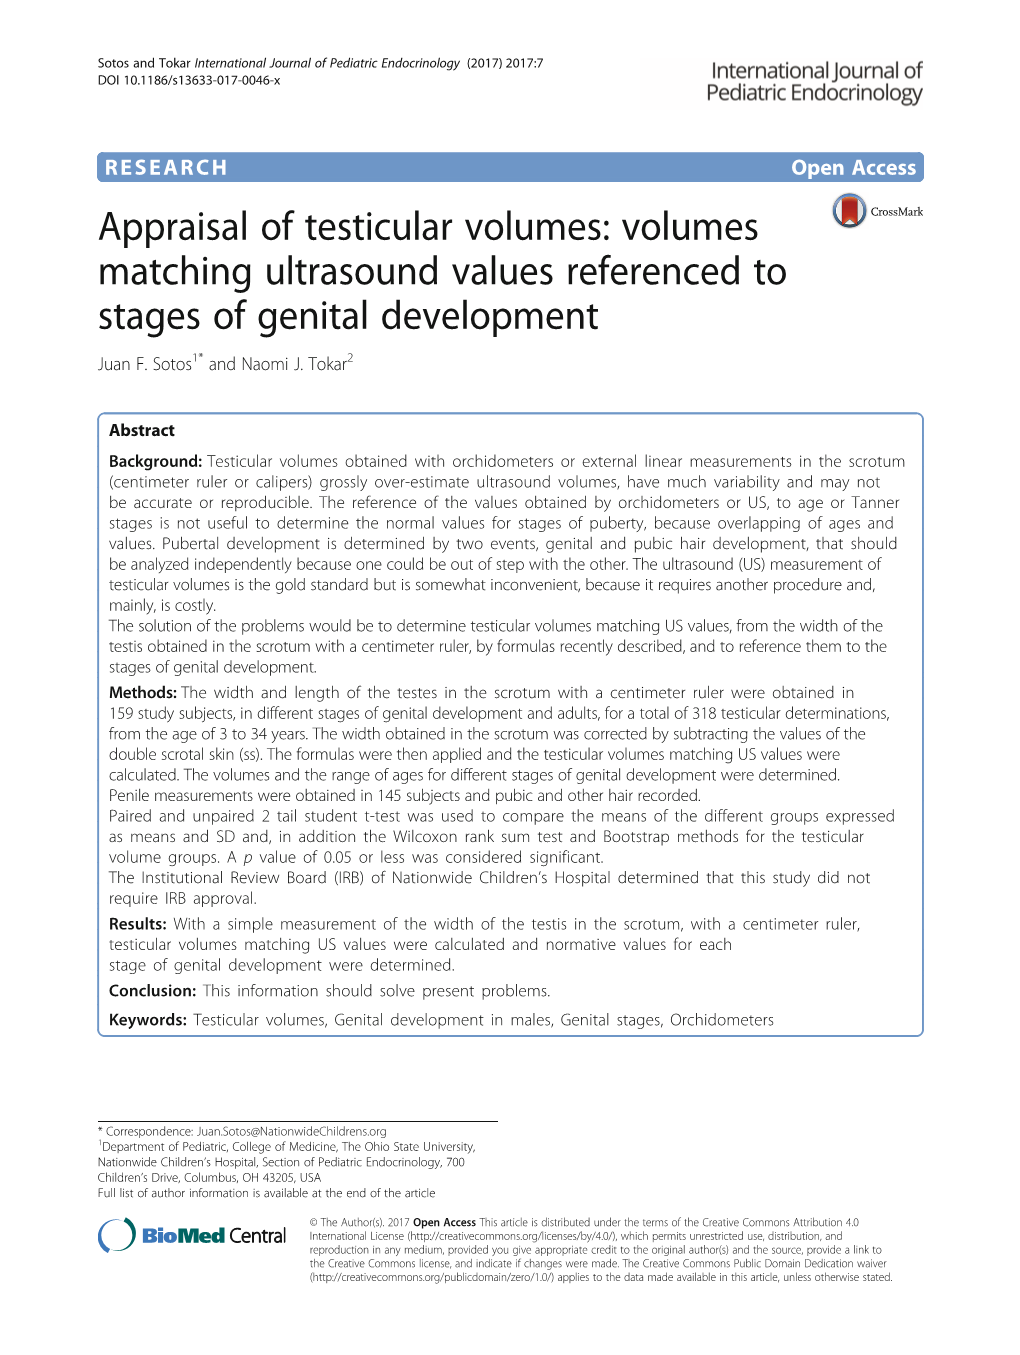 Appraisal of Testicular Volumes: Volumes Matching Ultrasound Values Referenced to Stages of Genital Development Juan F